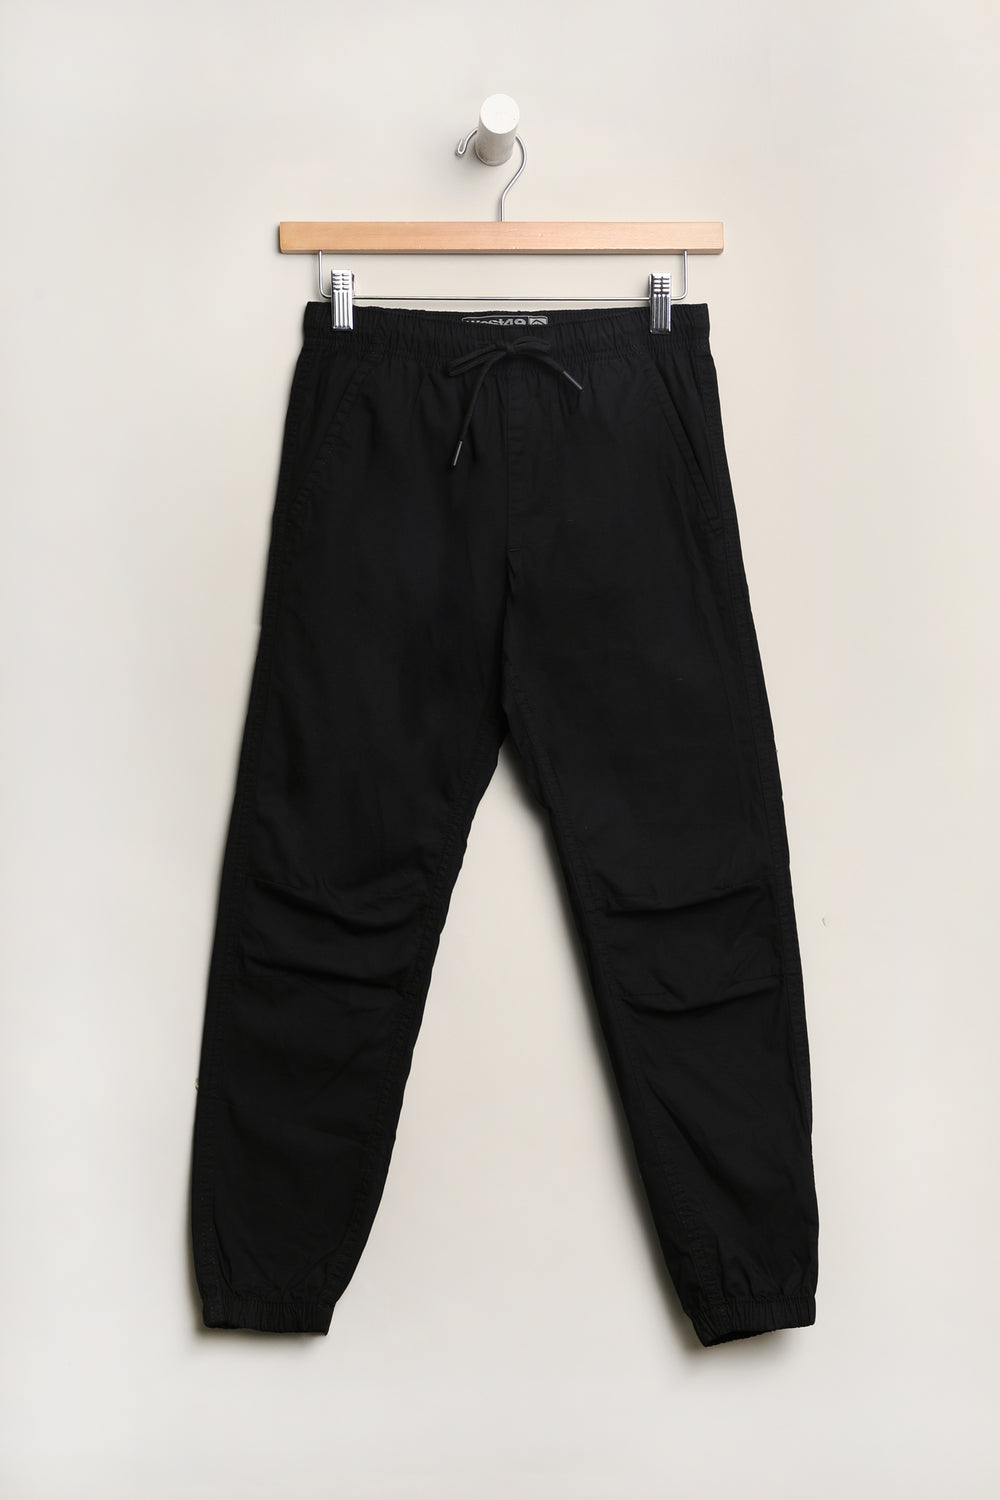 West49 Youth Relaxed Poplin Jogger West49 Youth Relaxed Poplin Jogger